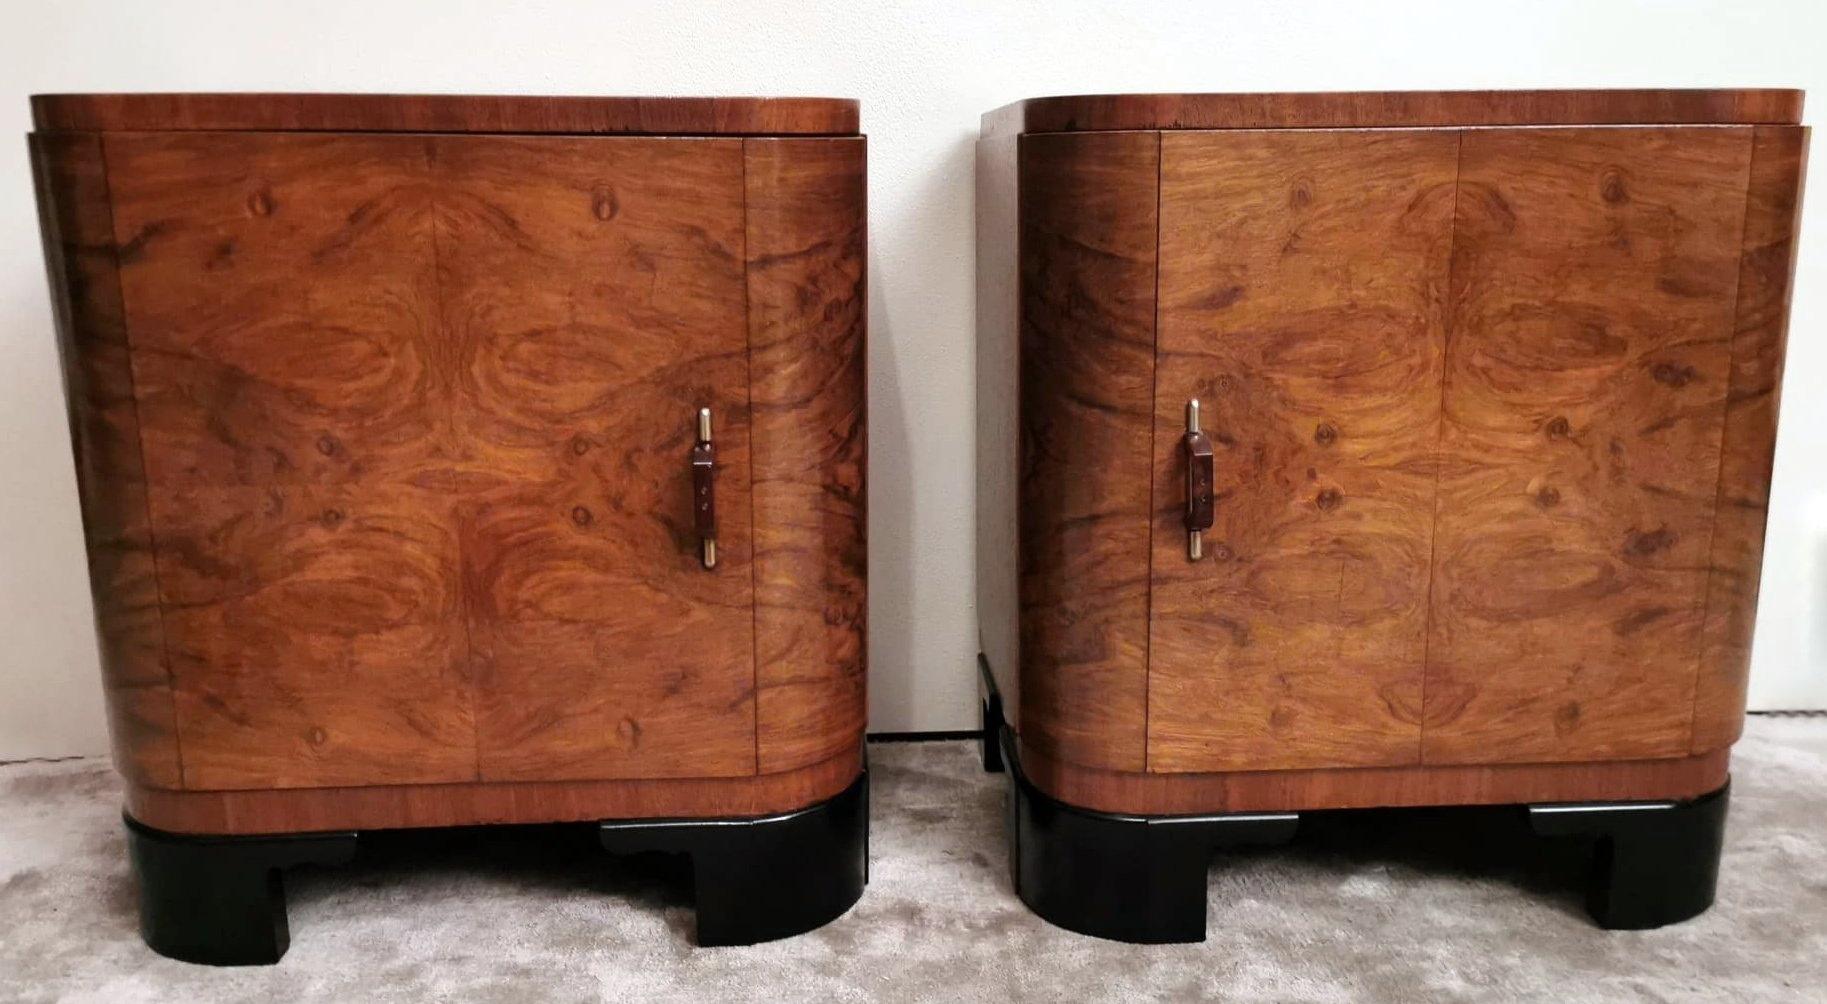 We kindly suggest you read the whole description, because with it we try to give you detailed technical and historical information to guarantee the authenticity of our objects.
Pair of original and unique Art Deco bedside tables; the entire frame of